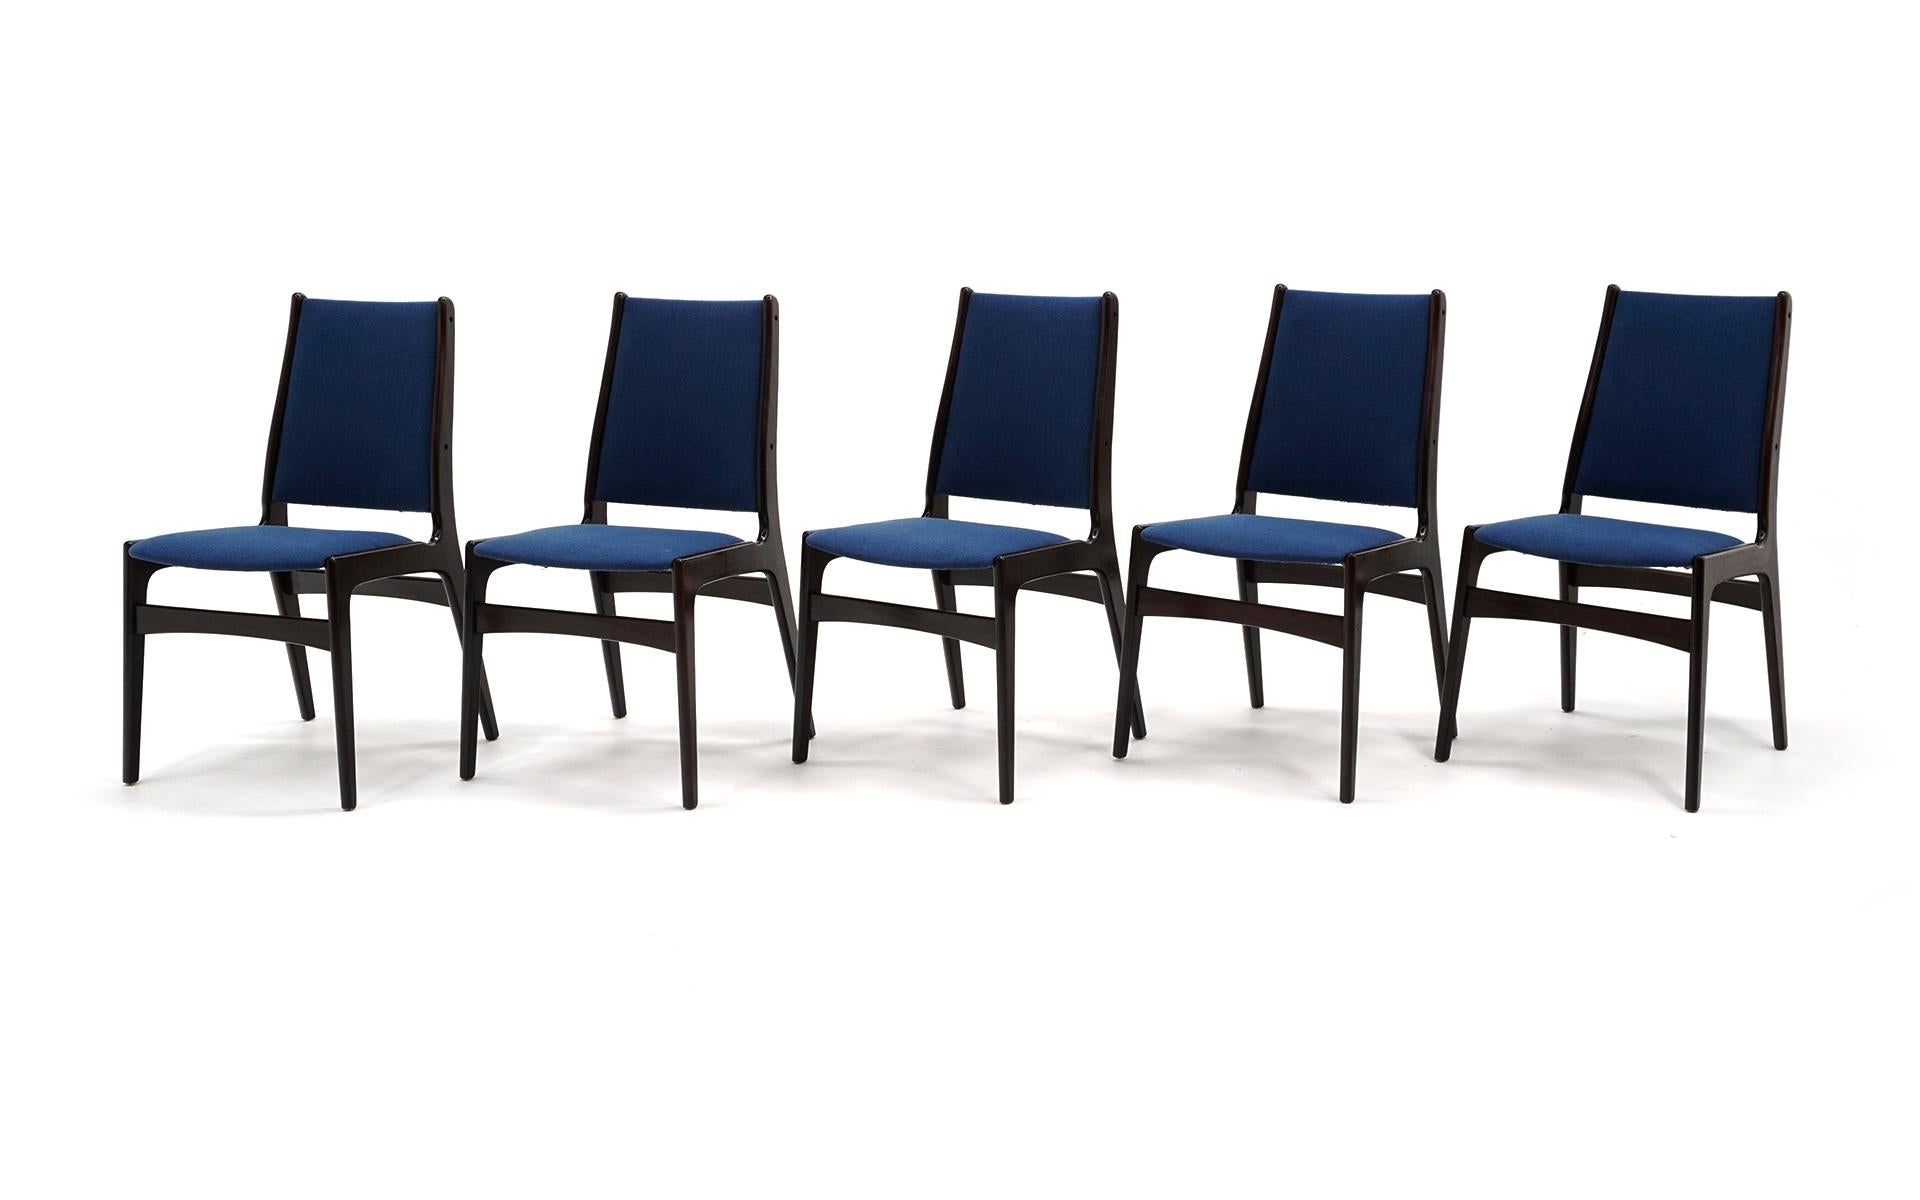 Set of 10 Danish modern dining chairs in Brazilian rosewood and new blue upholstery. Some slight wear in the form of small nicks and dents in the chair frames but no significant distractions and ready to use. The blue upholstery is new. Signed with